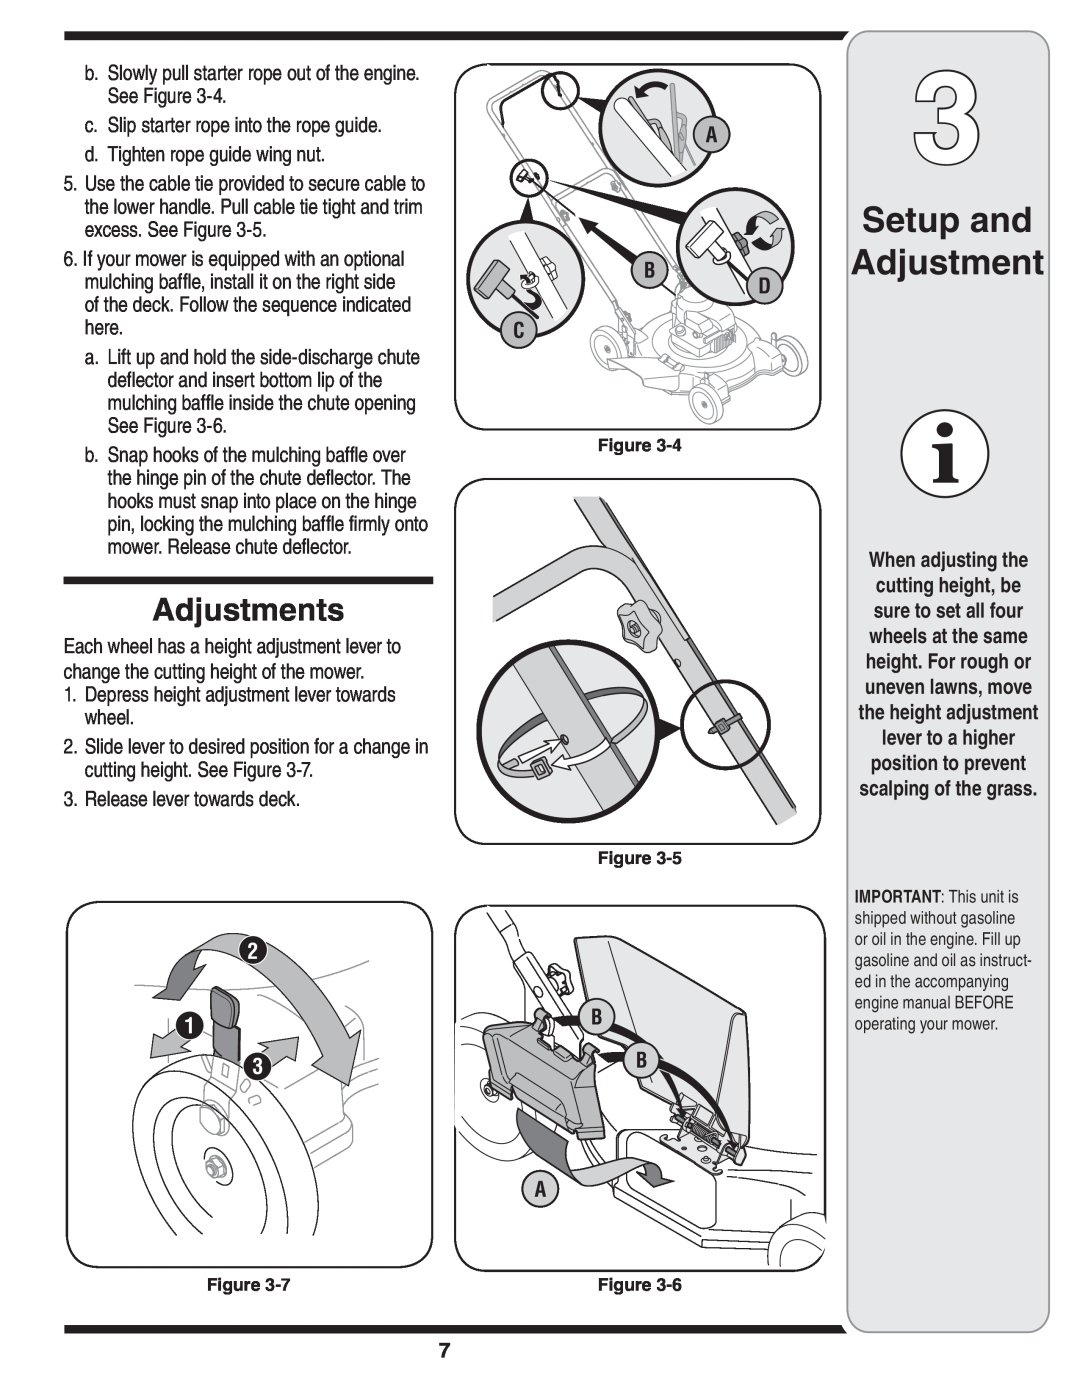 MTD 80 warranty Adjustments, d. Tighten rope guide wing nut, excess. See Figure, here, mower. Release chute deflector 